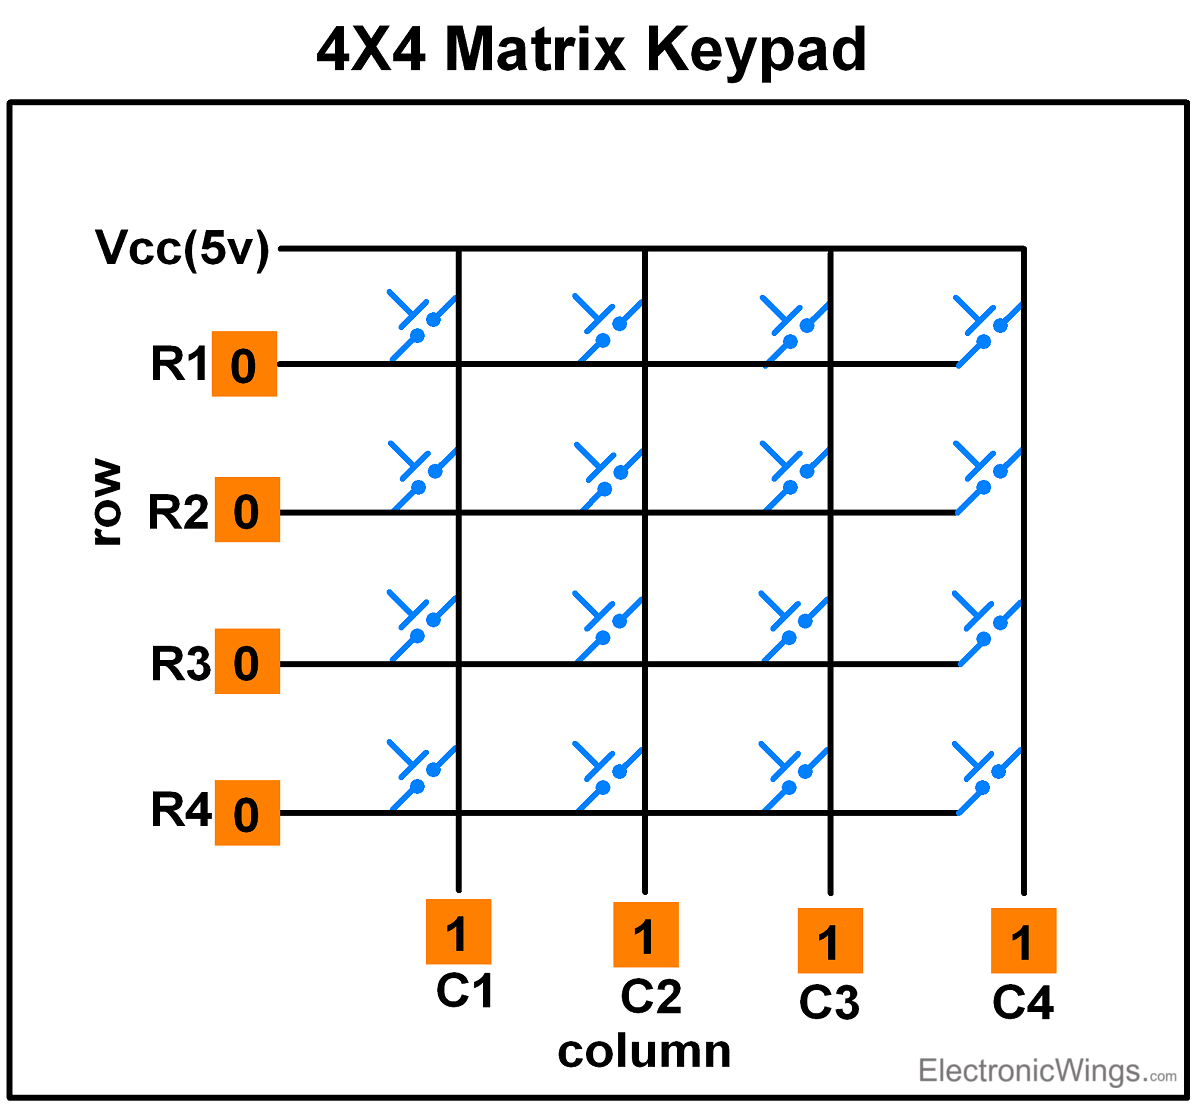 This picture shows 4x4 keypad pinout